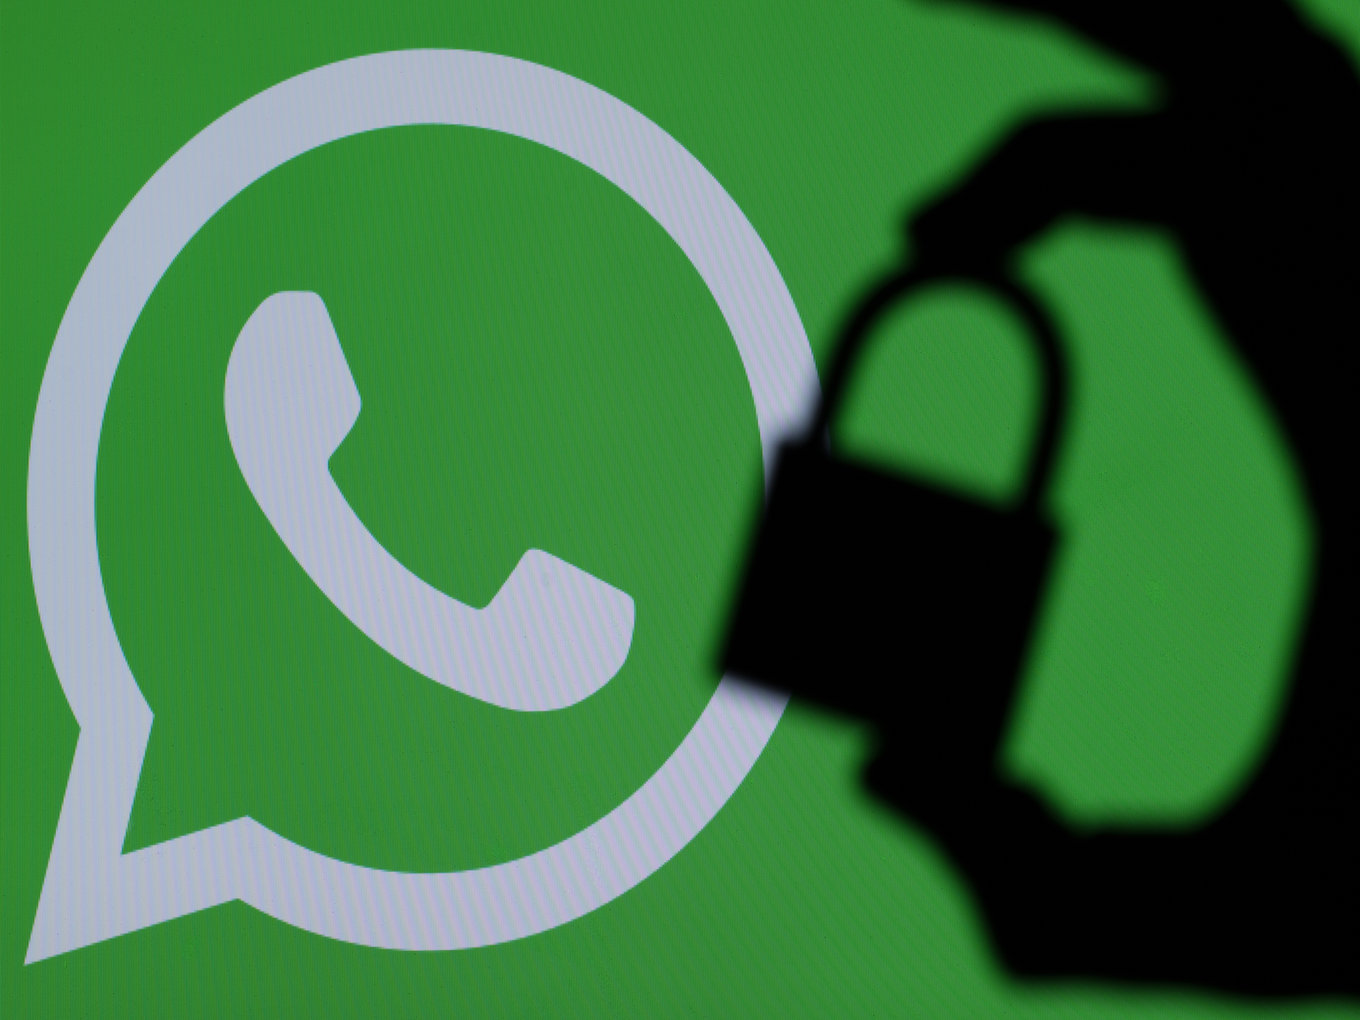 Pegasus Spyware Scandal: WhatsApp Users Ask Govt To Reveal Ties With NSO